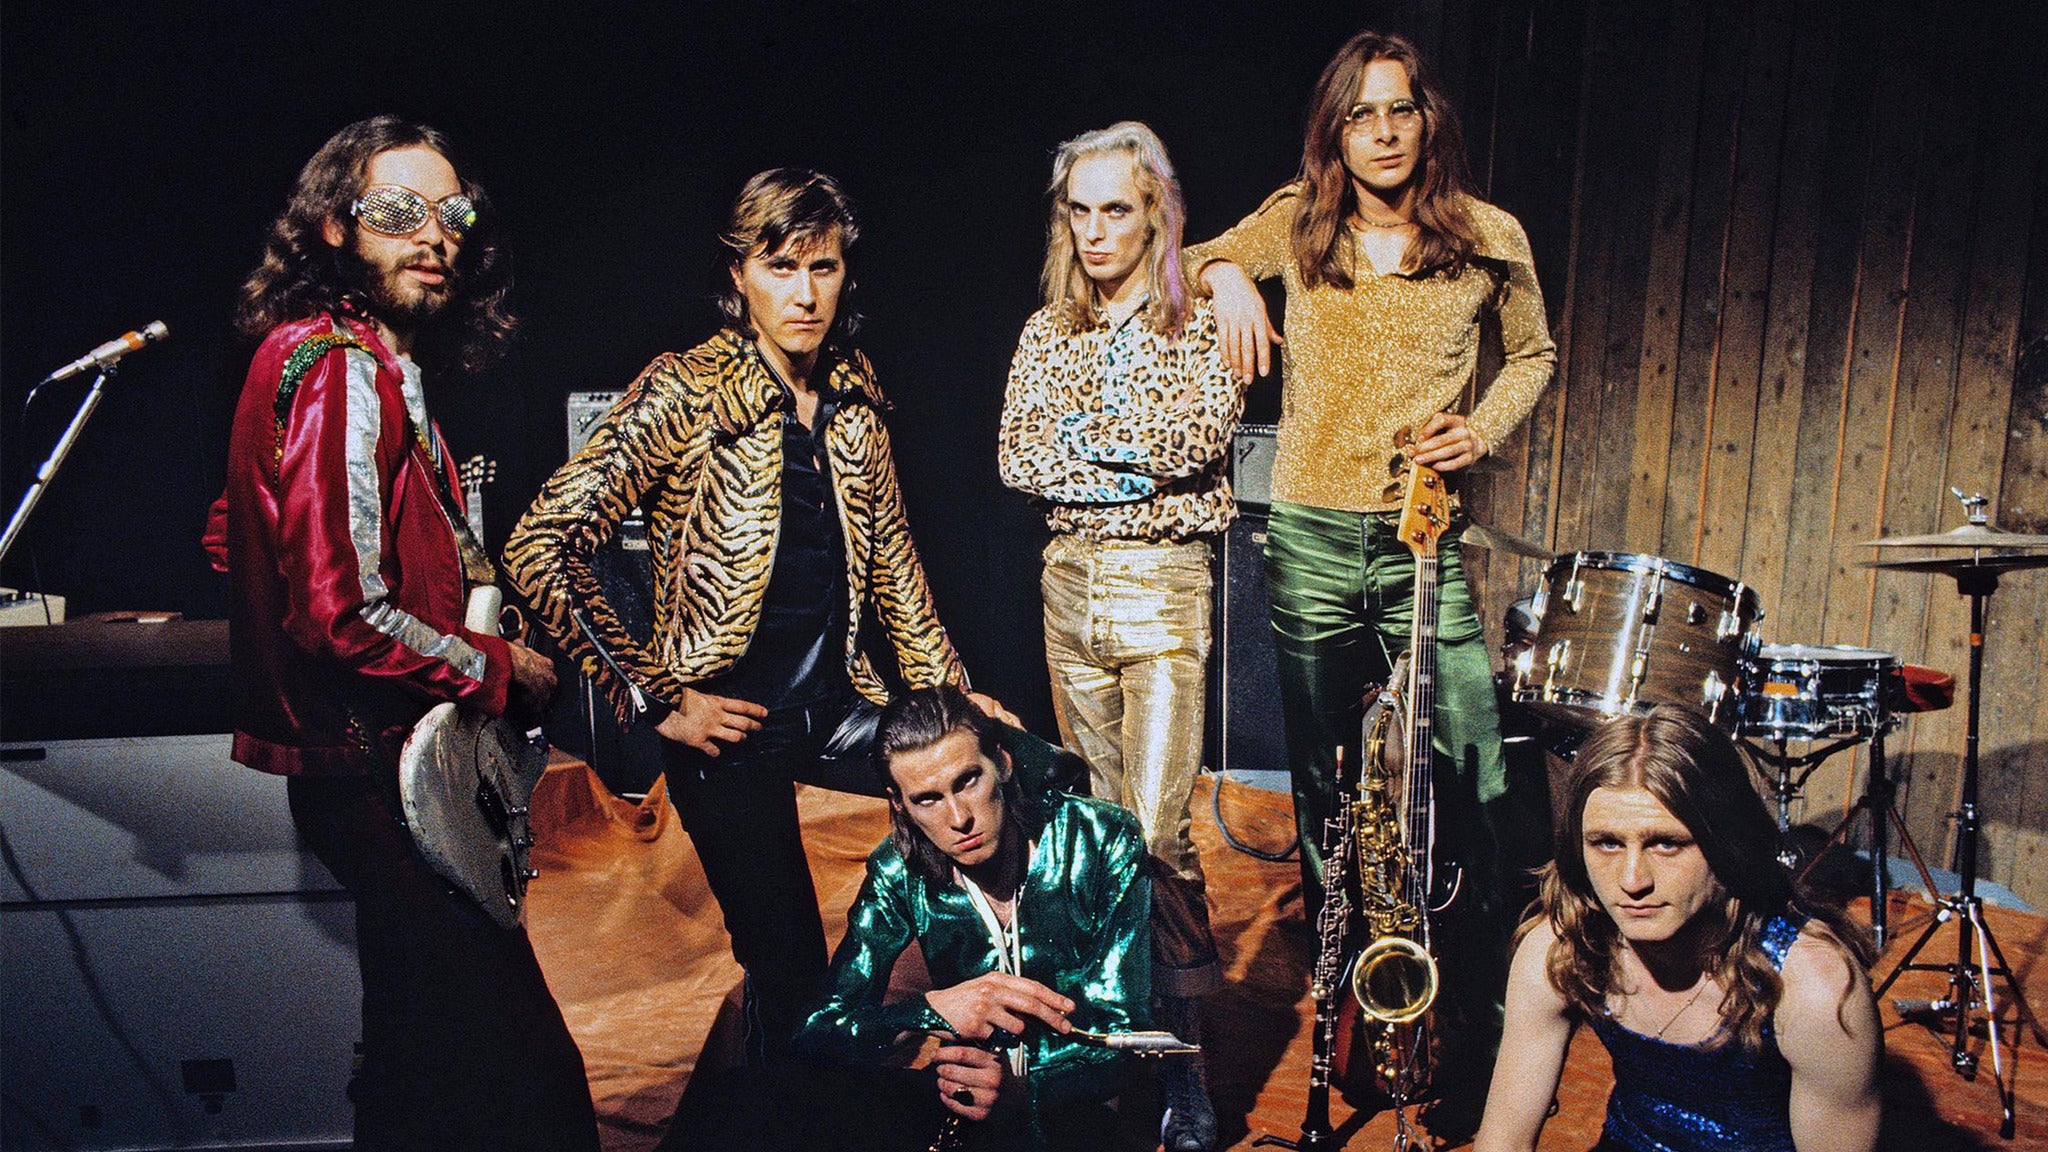 Roxy Music 50th Anniversary Tour in New York promo photo for Live Nation presale offer code